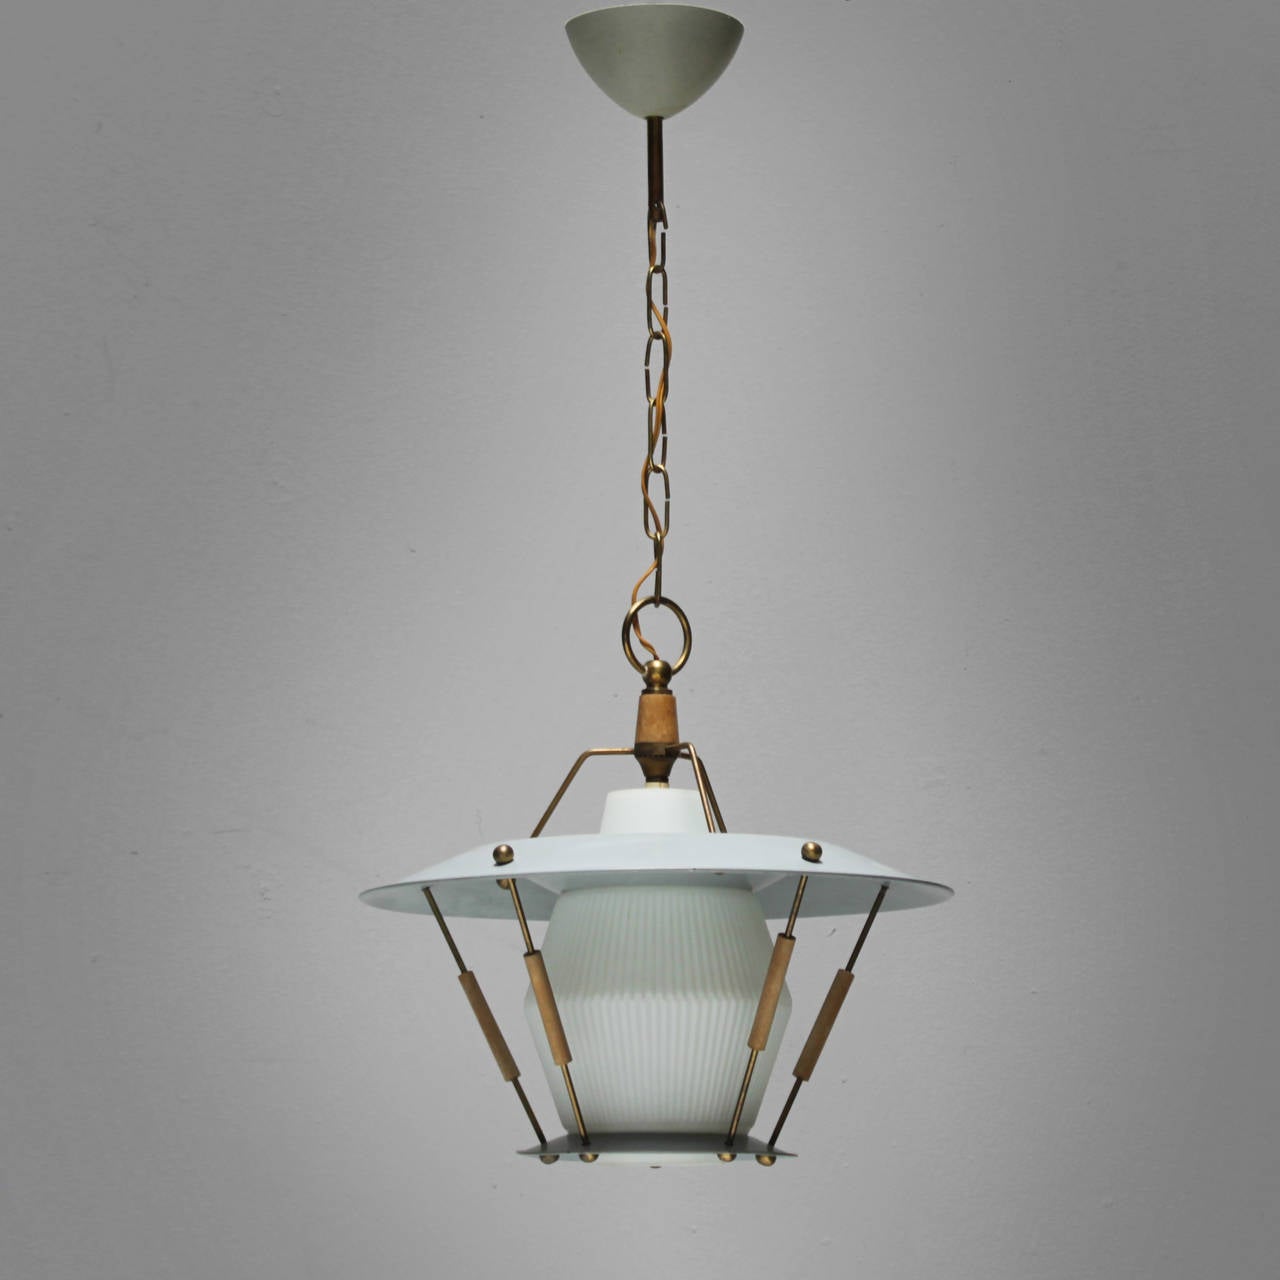 Lacquered Italian Lantern in the Style of Arredoluce